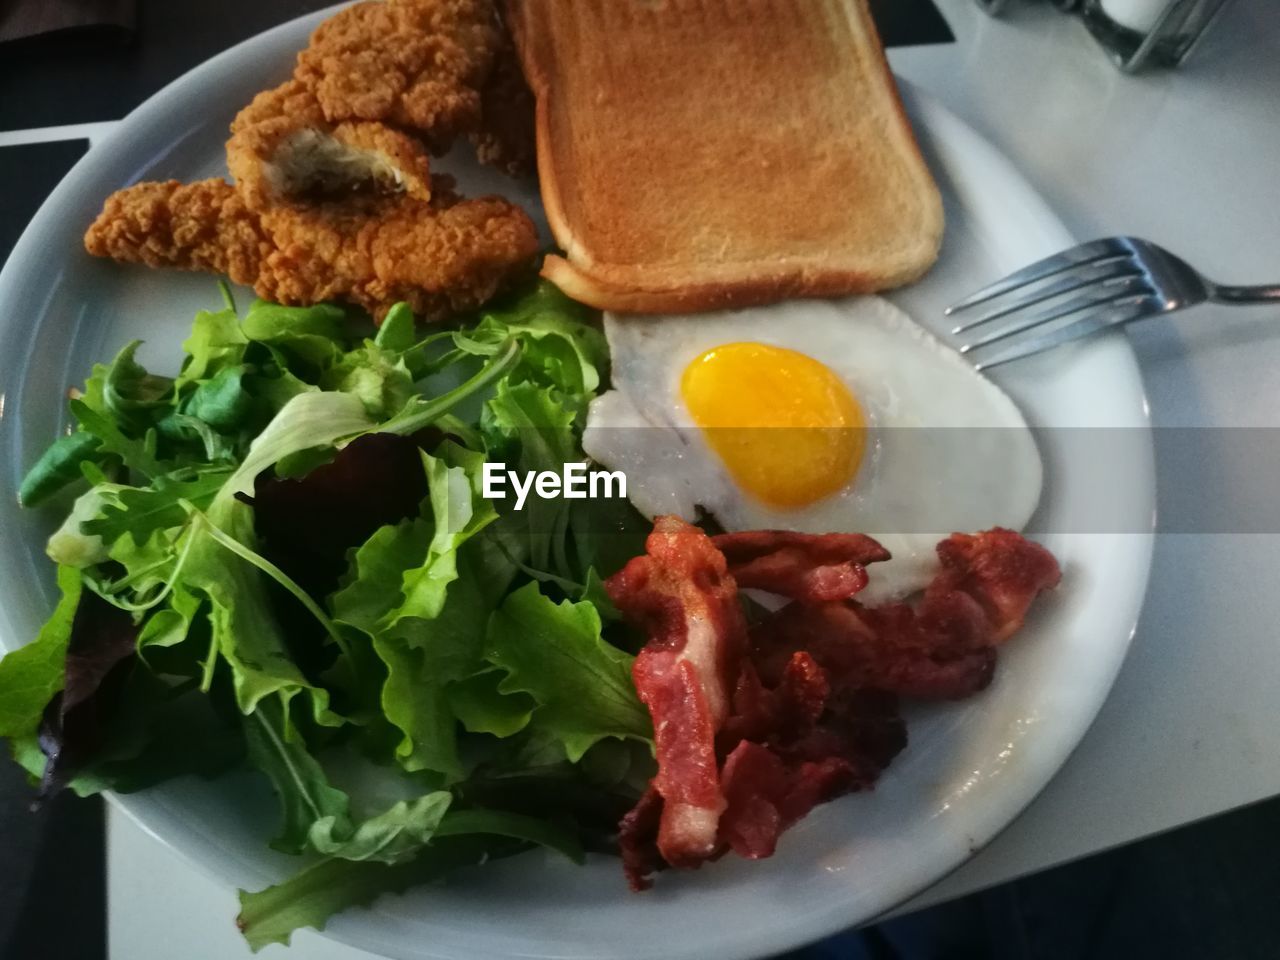 CLOSE-UP OF BREAKFAST SERVED ON PLATE